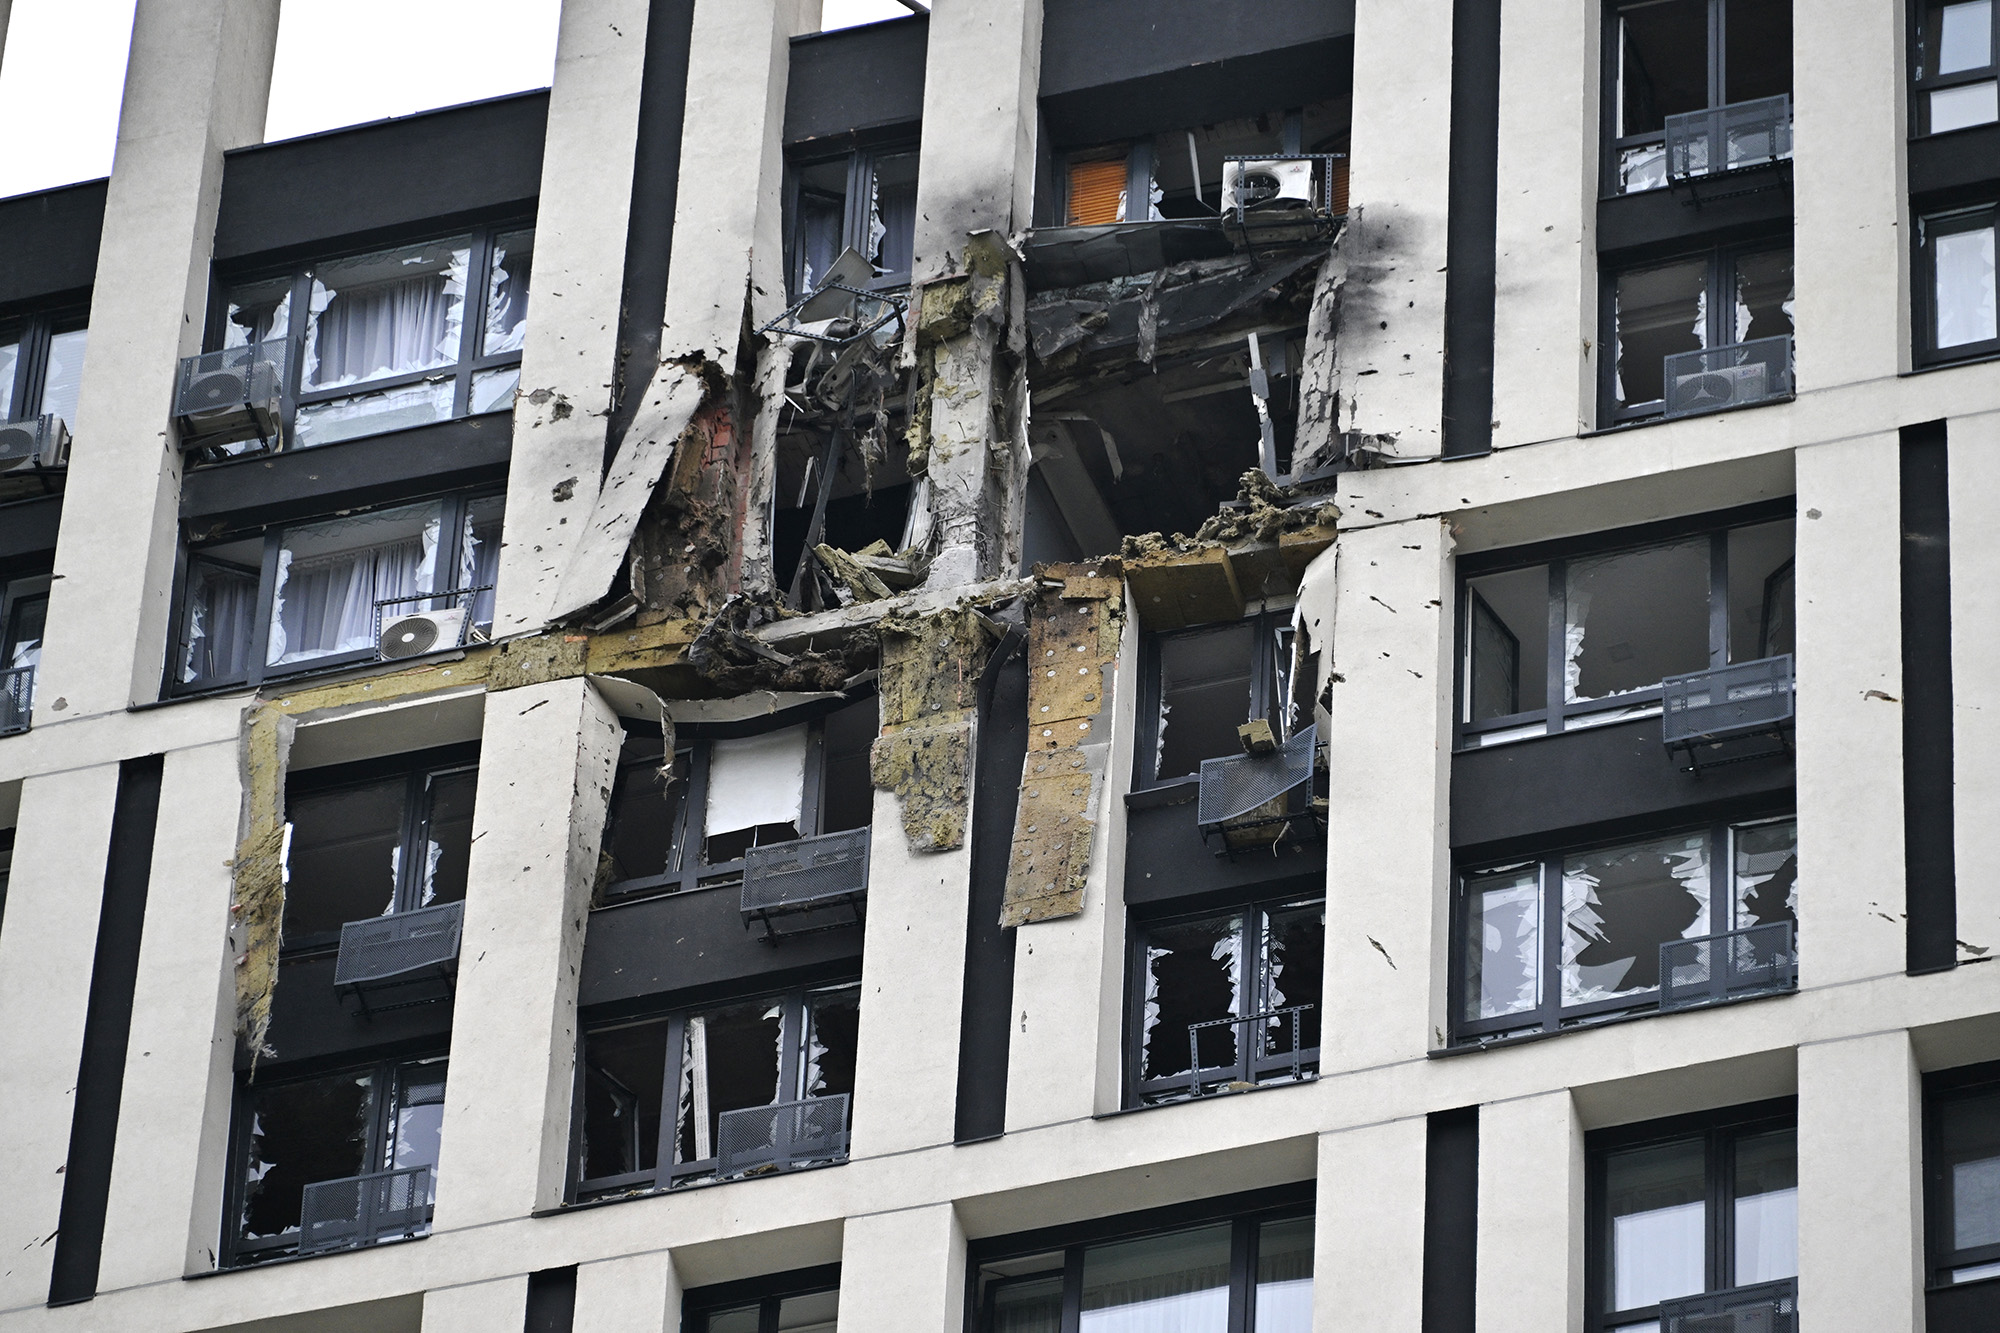 A high-rise residential building damaged during a drone attack in Kyiv, Ukraine, said on July 13.